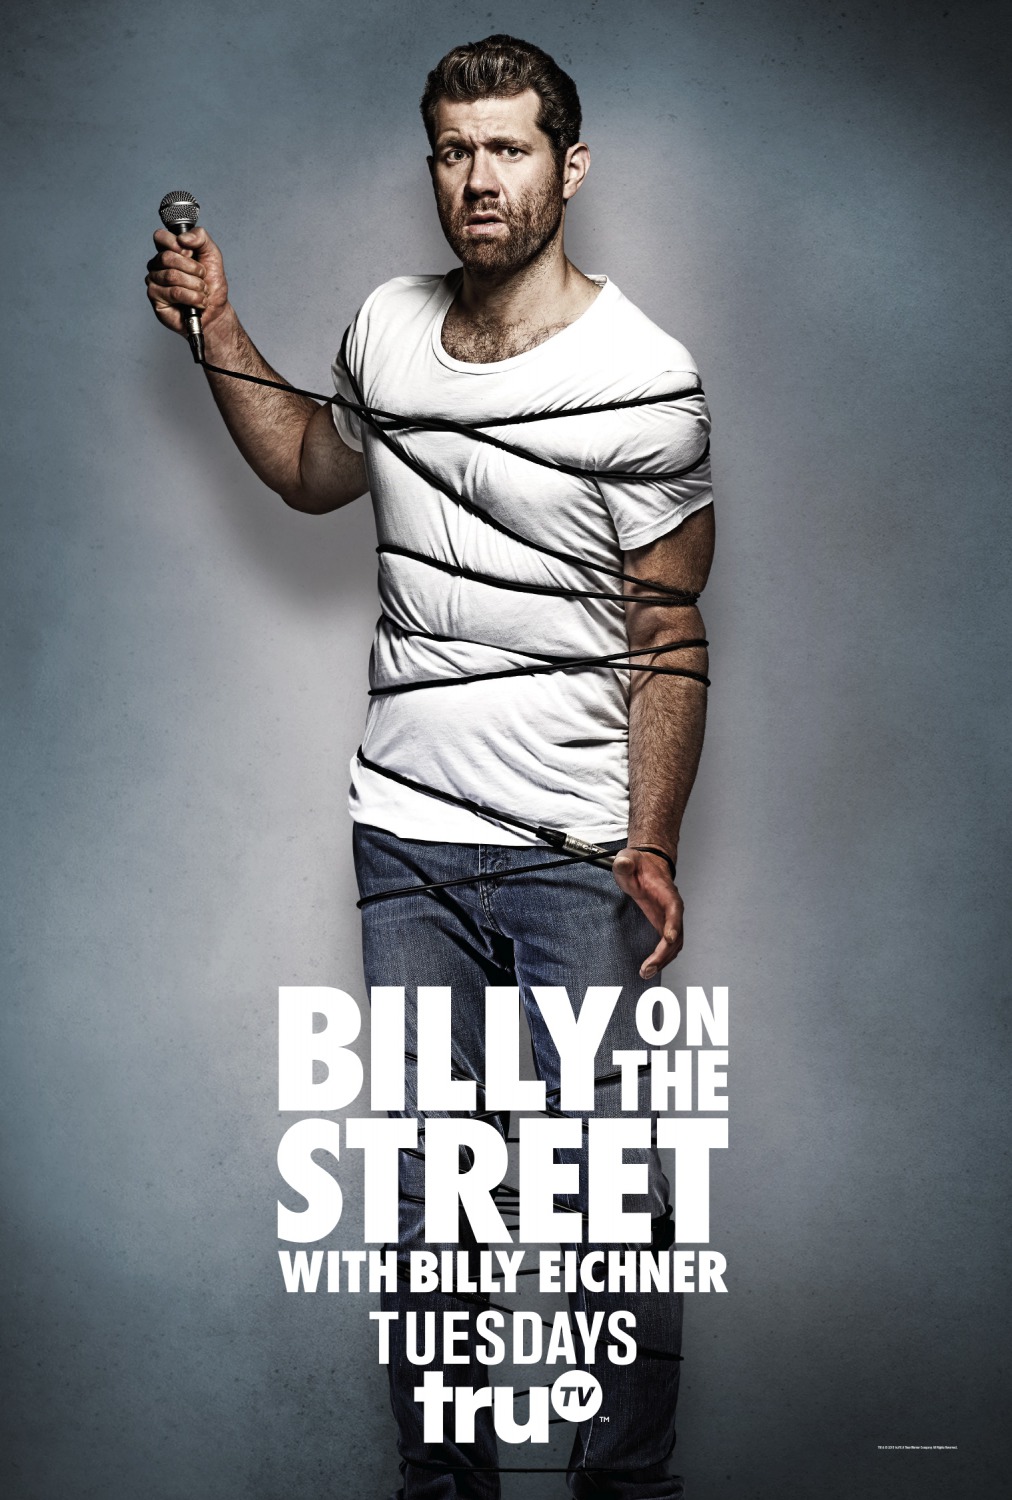 Extra Large Movie Poster Image for Billy on the Street (#2 of 2)